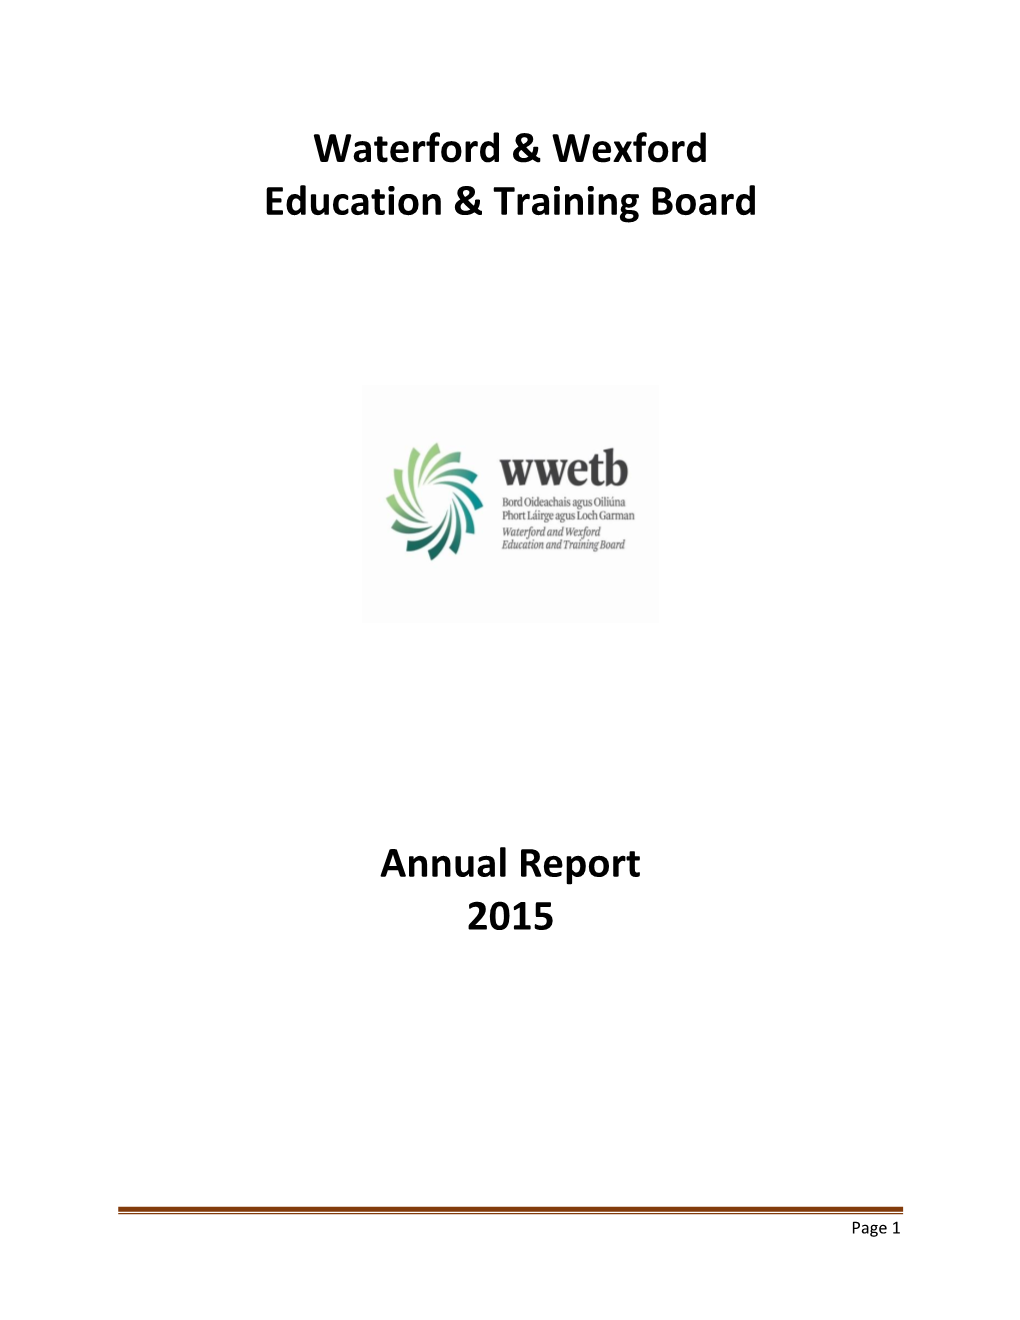 Waterford & Wexford Education & Training Board Annual Report 2015